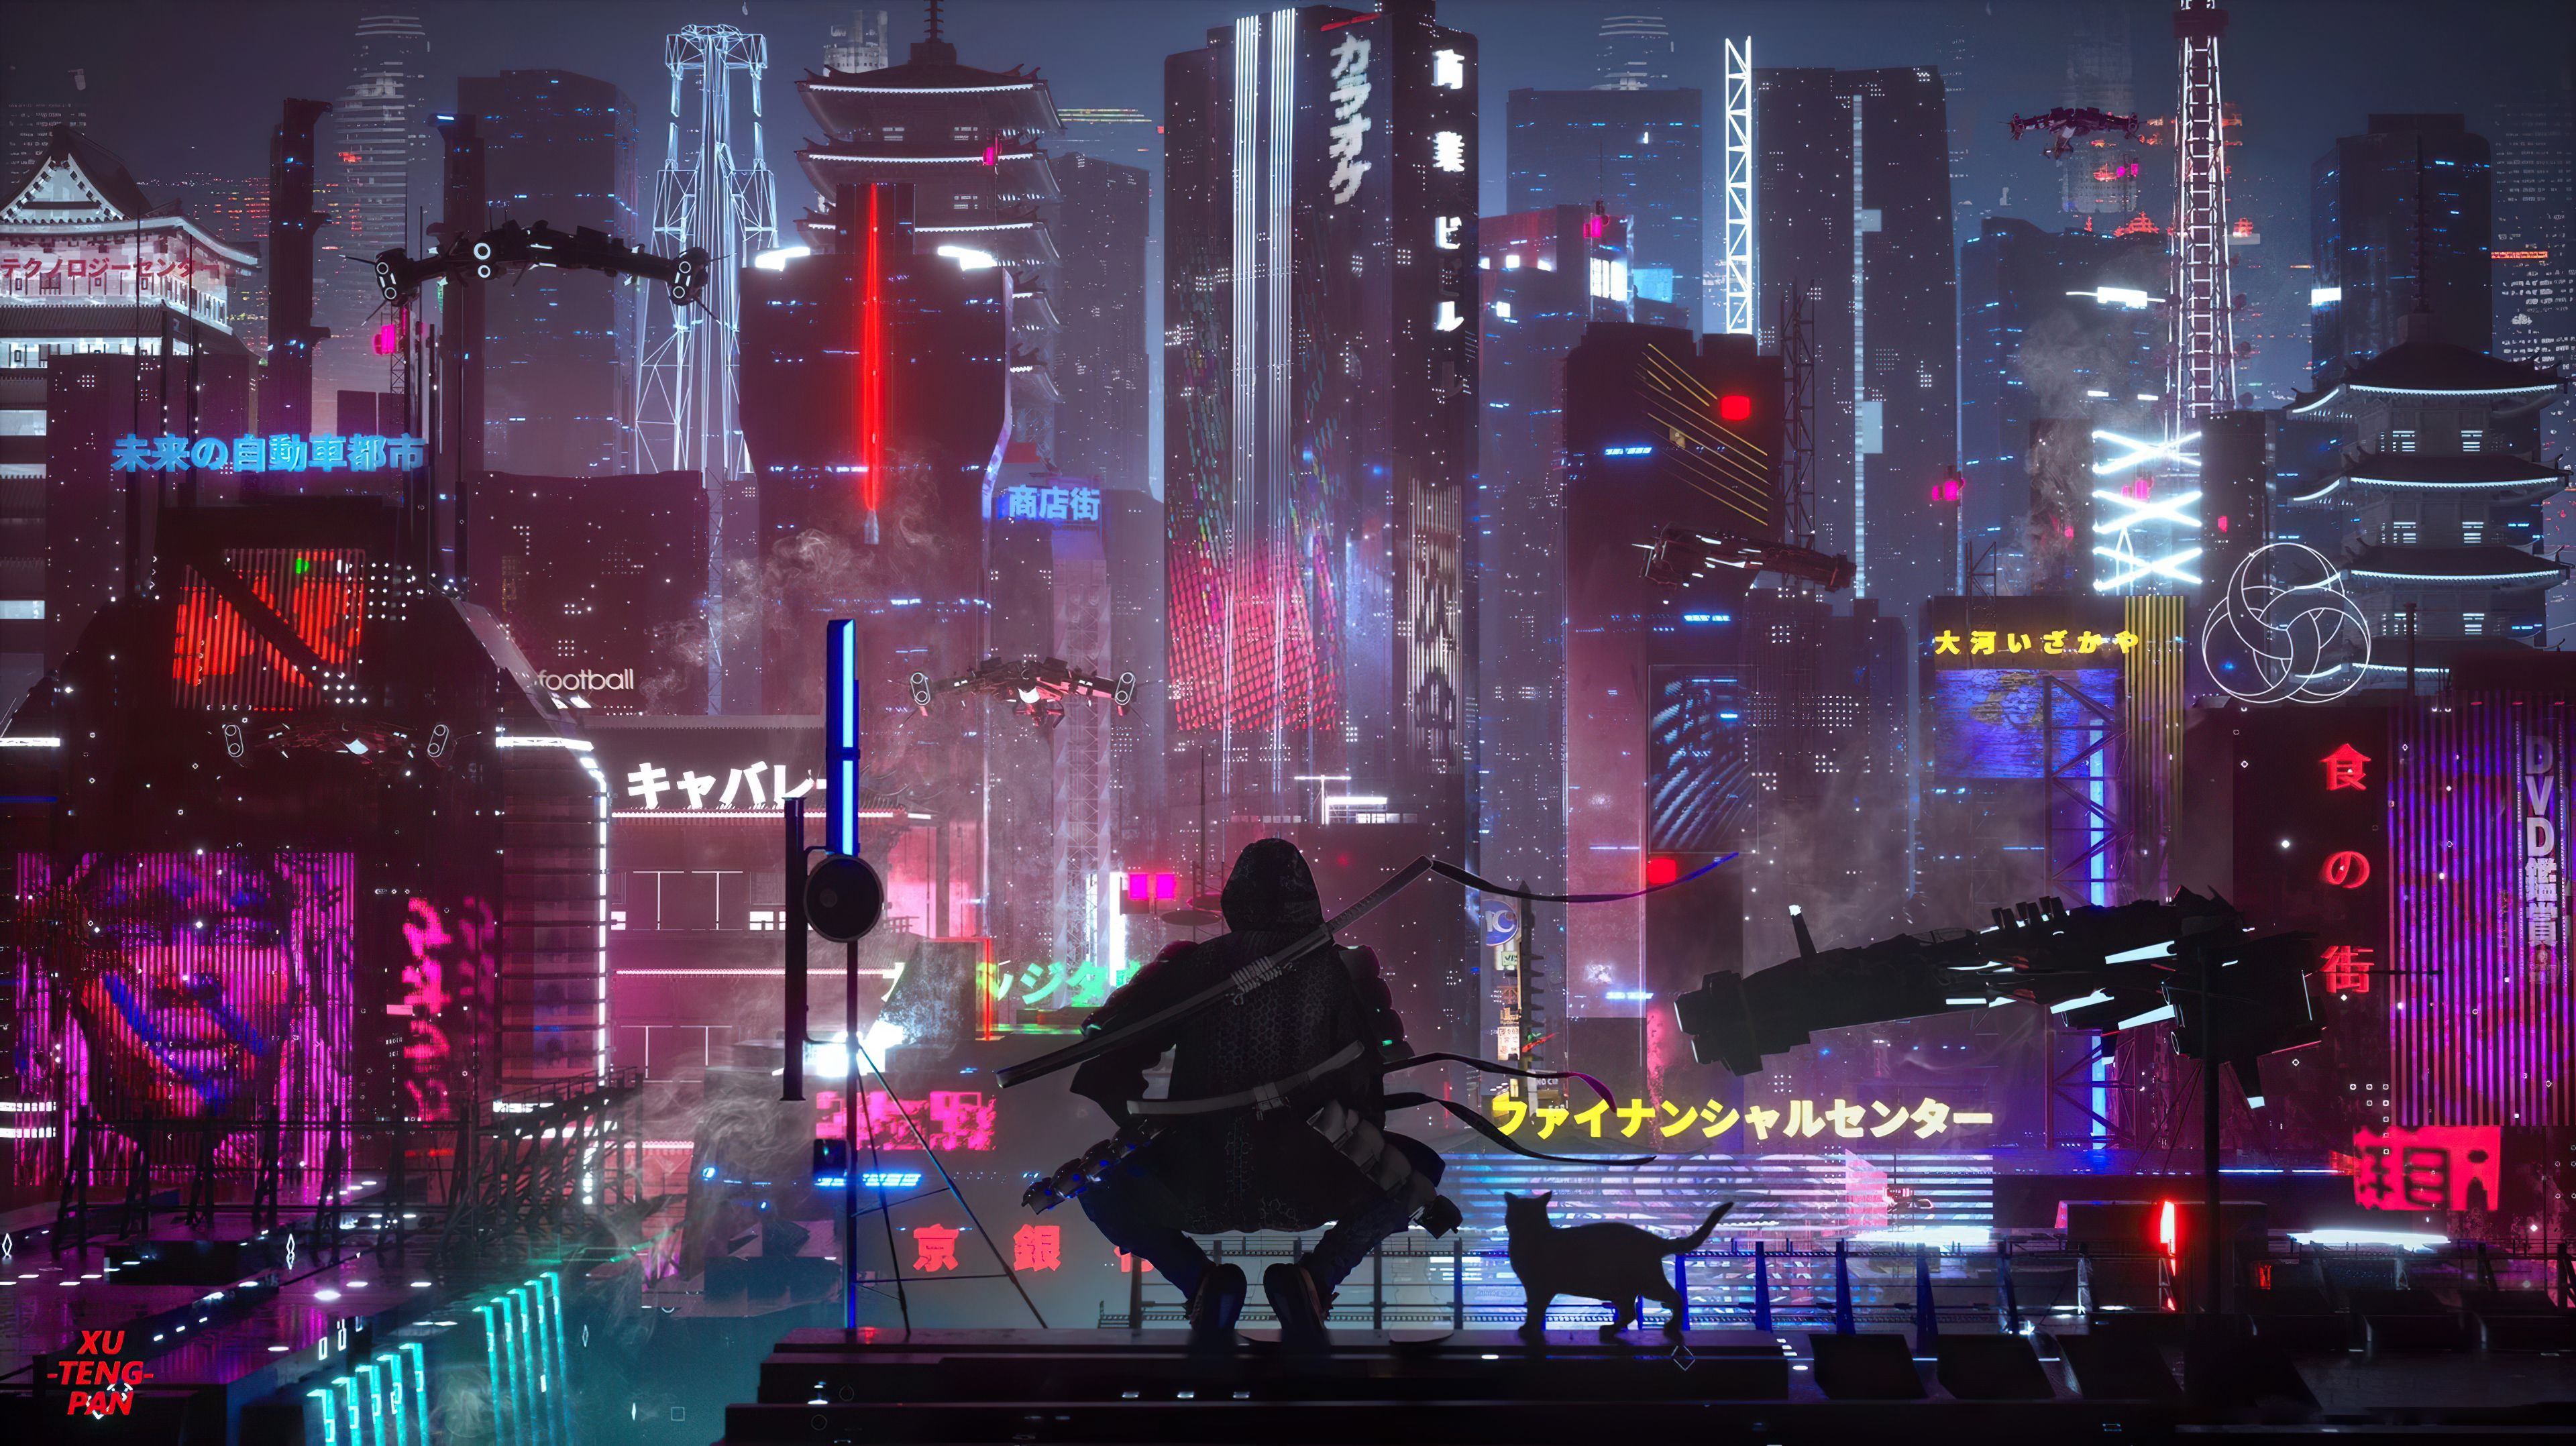 Tokyo Future State Warrior With Cat 4k Tokyo Future State Warrior With Cat 4k wallpaper. Cyberpunk city, Future city, Cyberpunk aesthetic